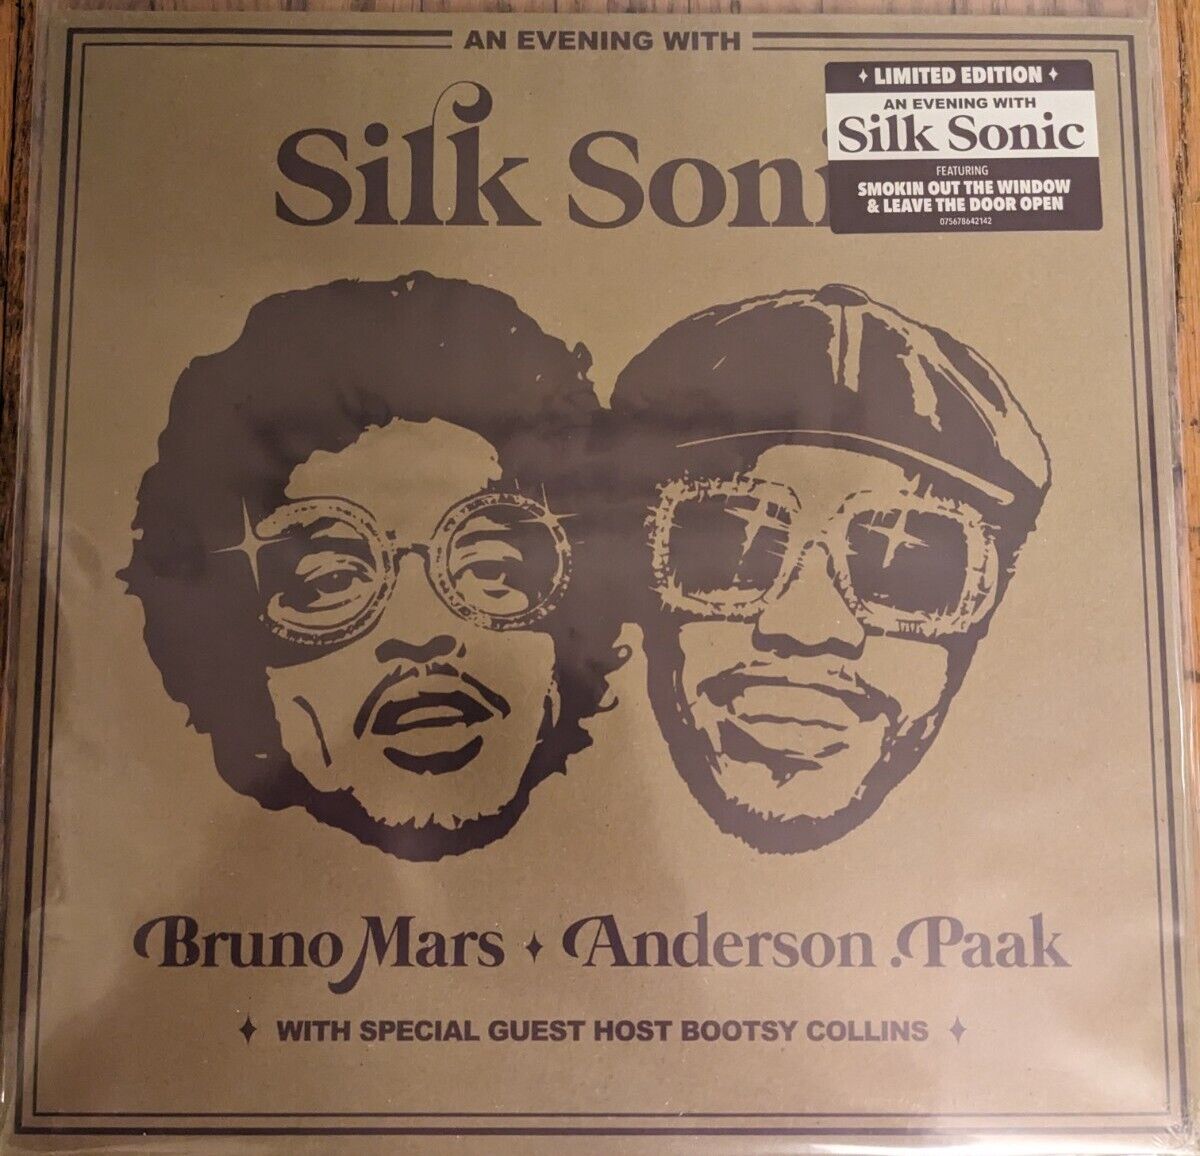 Silk Sonic An Evening With Silk Sonic Webstore Exclusive Limited Edition MINT